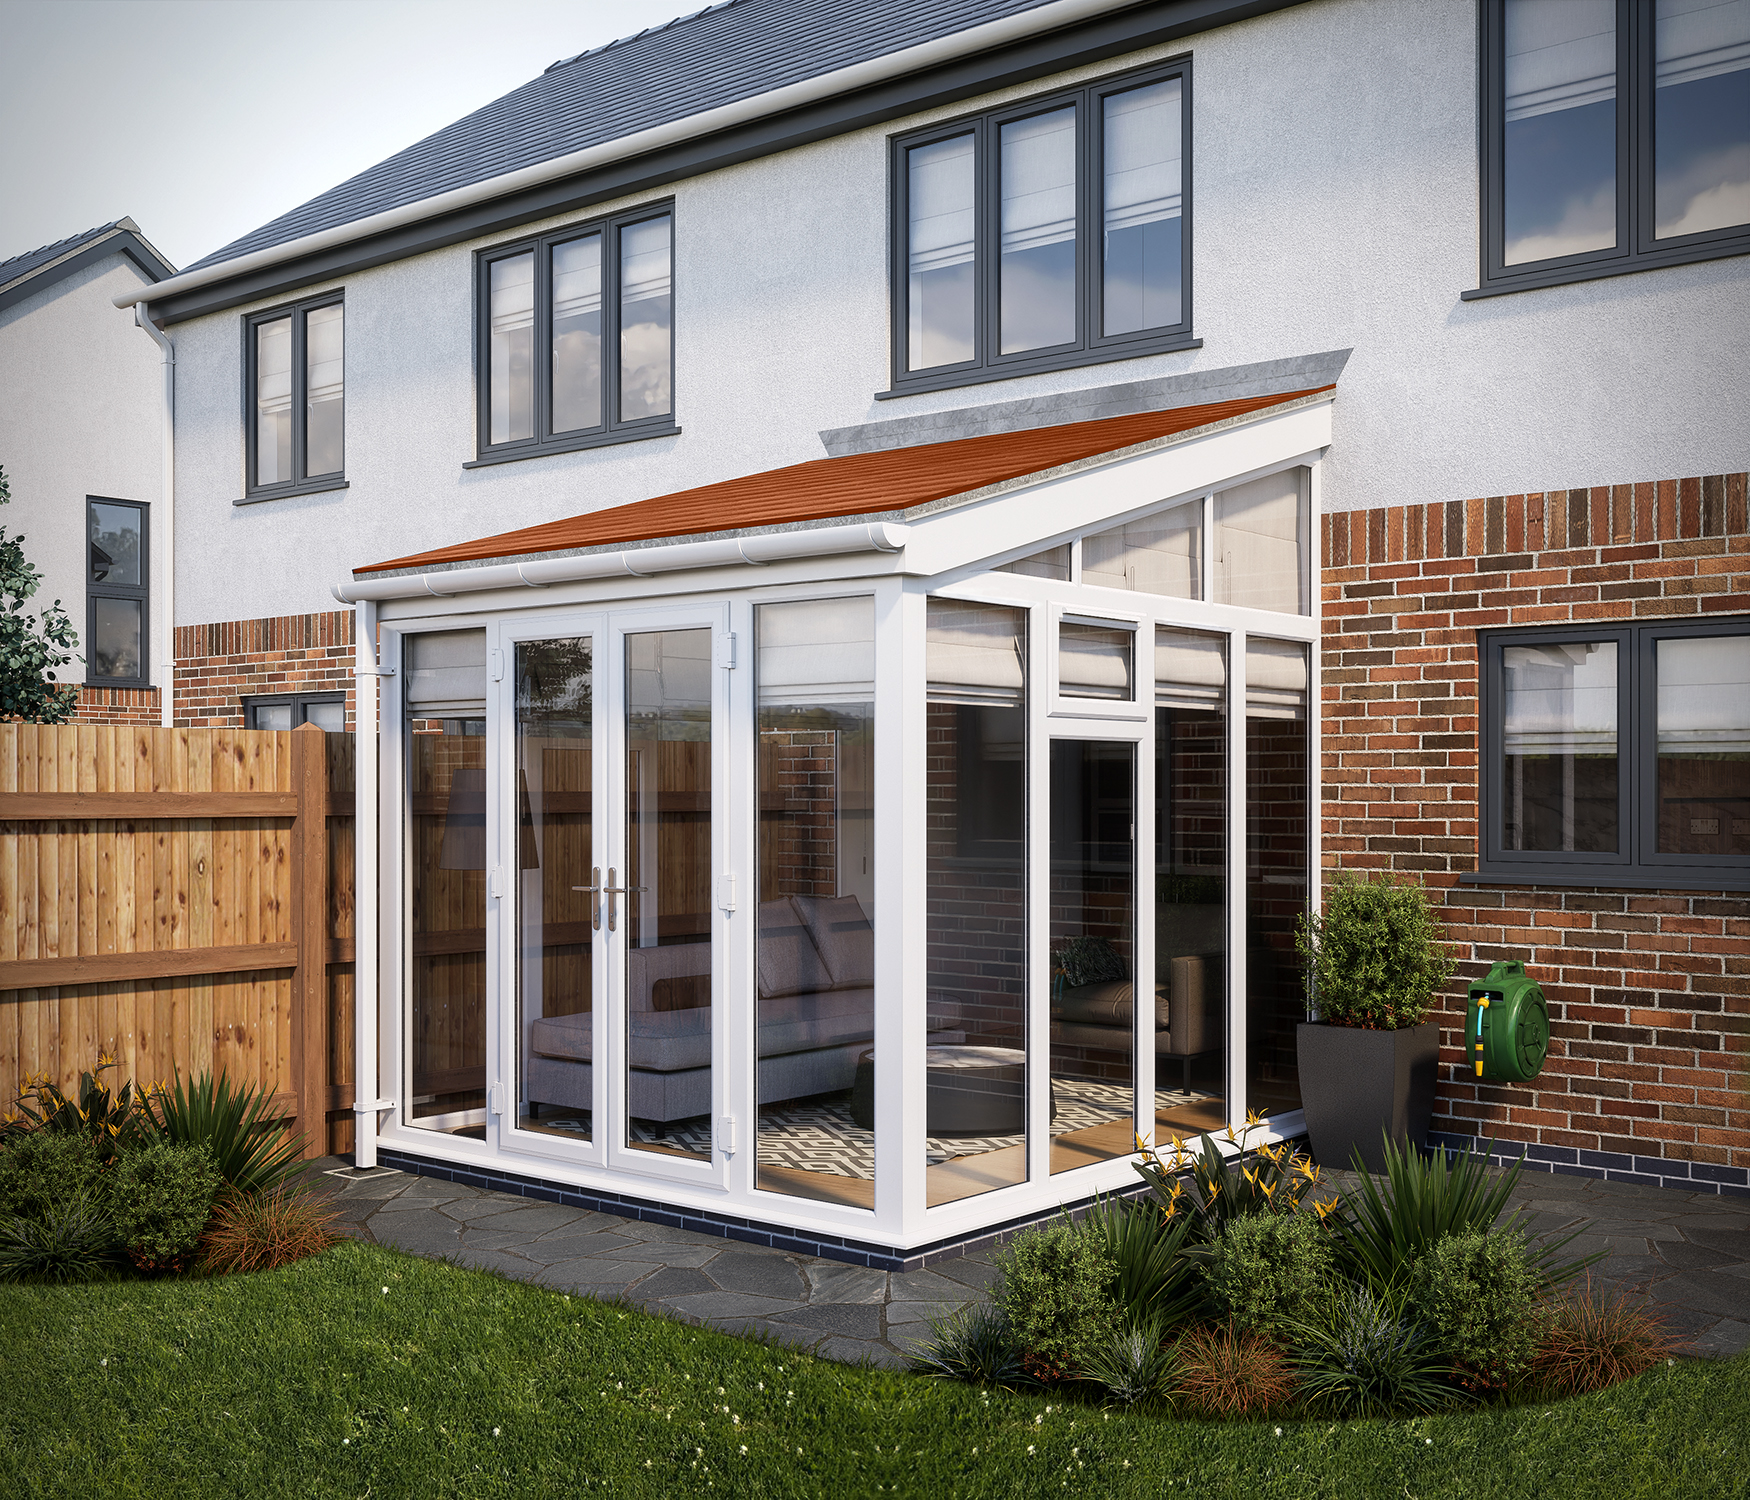 Image of SOLid Roof Full Height Lean to Conservatory White Frames with Rustic Terracotta Tiles - 13 x 10ft